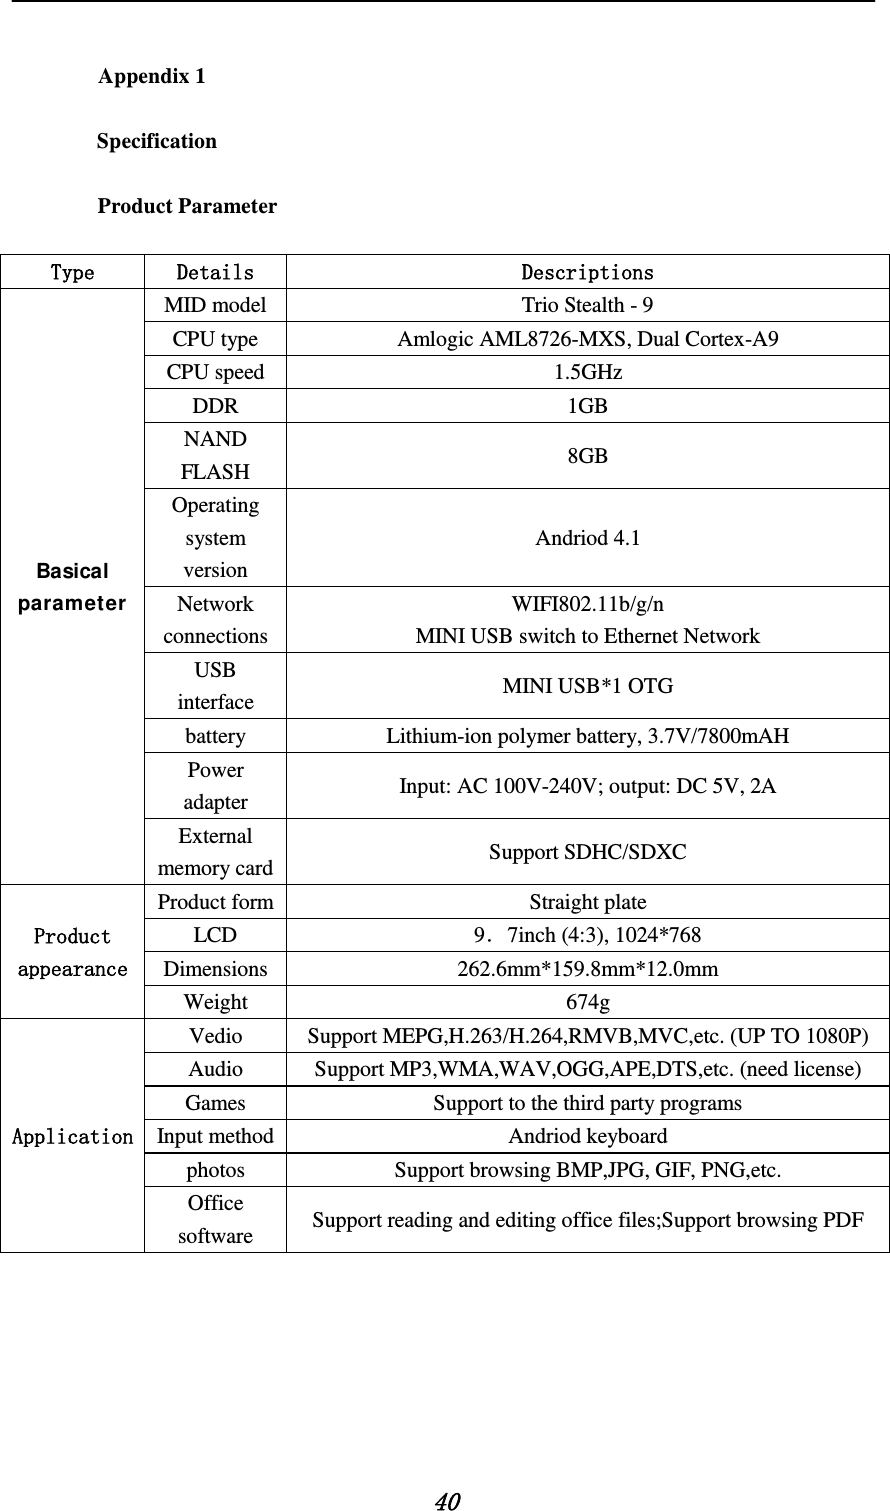    40  Appendix 1  Specification  Product Parameter  Type Details Descriptions Basical parameter MID model Trio Stealth - 9 CPU type Amlogic AML8726-MXS, Dual Cortex-A9 CPU speed 1.5GHz DDR   1GB NAND FLASH 8GB Operating system version Andriod 4.1 Network connections WIFI802.11b/g/n MINI USB switch to Ethernet Network USB interface MINI USB*1 OTG battery Lithium-ion polymer battery, 3.7V/7800mAH Power adapter Input: AC 100V-240V; output: DC 5V, 2A External memory card Support SDHC/SDXC Product appearance Product form Straight plate LCD 9．7inch (4:3), 1024*768 Dimensions 262.6mm*159.8mm*12.0mm Weight 674g Application Vedio Support MEPG,H.263/H.264,RMVB,MVC,etc. (UP TO 1080P) Audio Support MP3,WMA,WAV,OGG,APE,DTS,etc. (need license) Games Support to the third party programs Input method Andriod keyboard photos Support browsing BMP,JPG, GIF, PNG,etc. Office software Support reading and editing office files;Support browsing PDF      